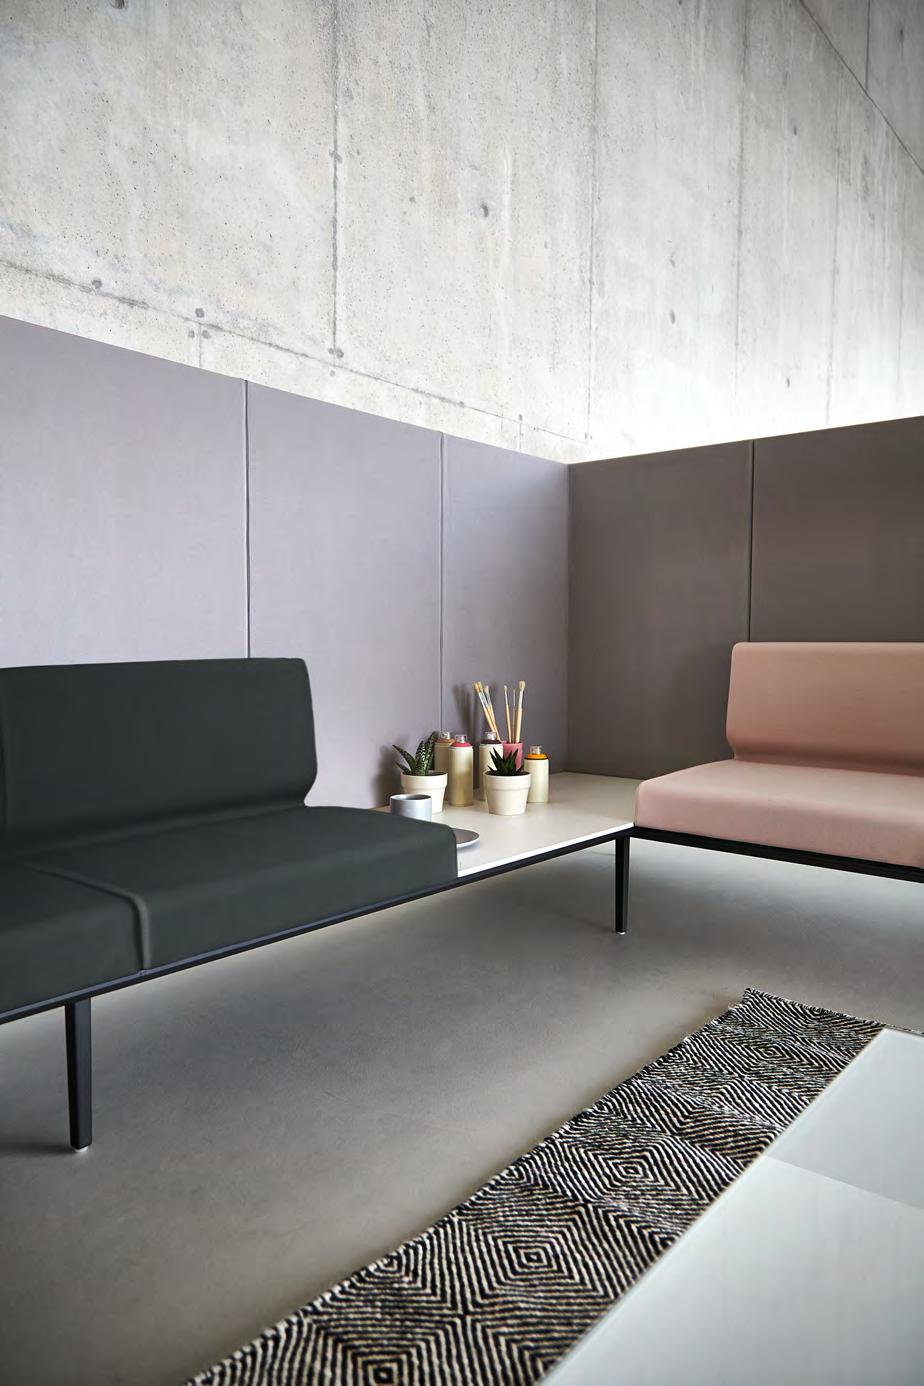 With unique soft seating systems capable of taking the work space to a new level. Rethink where seating ends and desking begins.